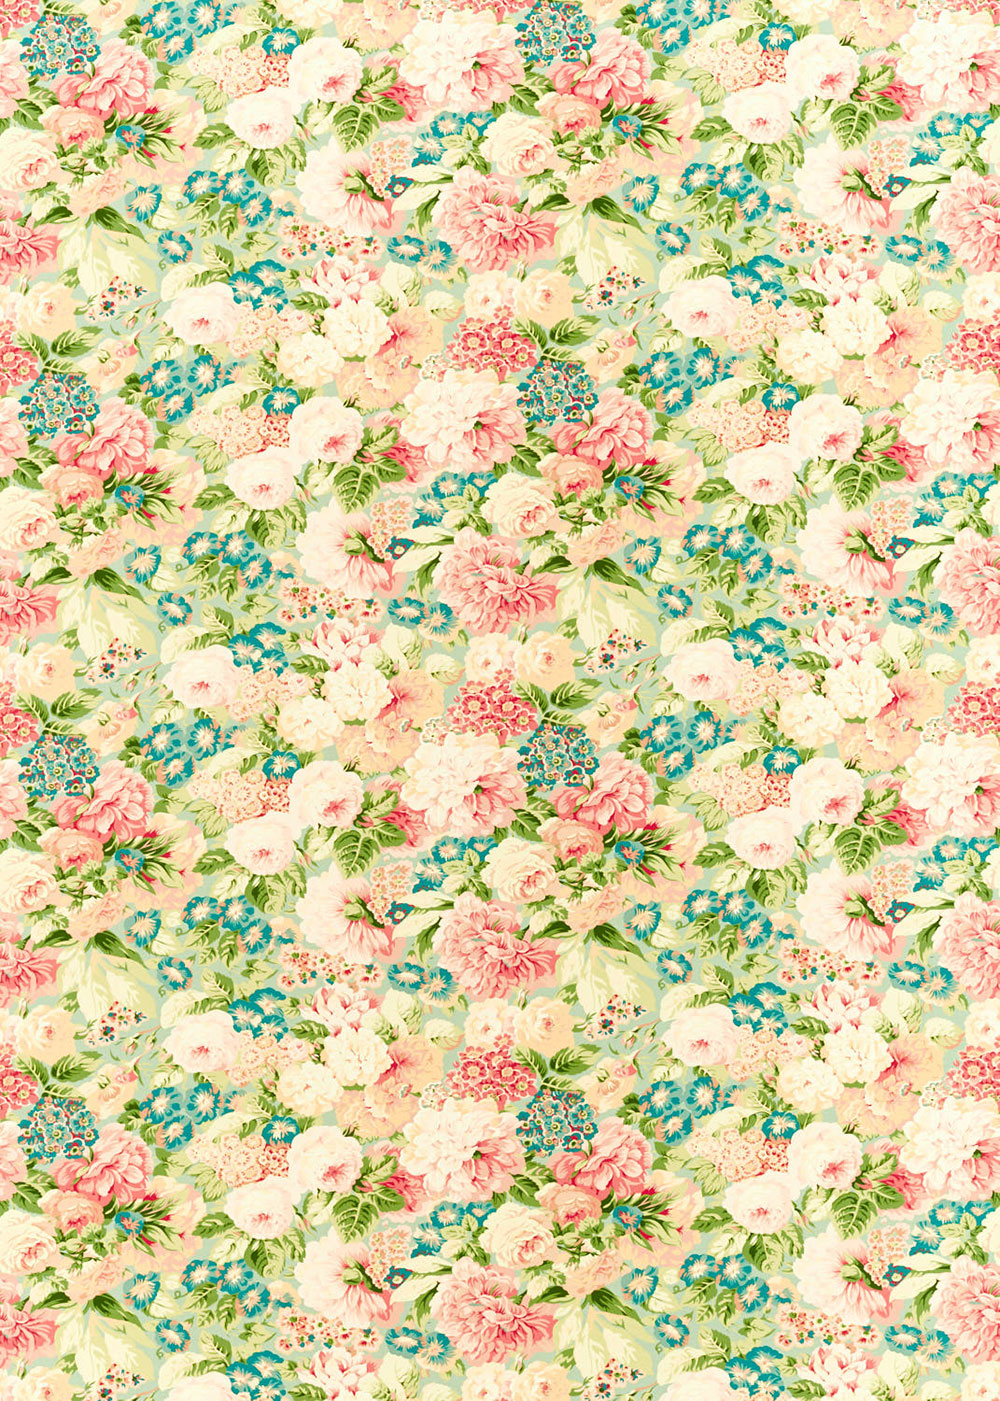 Rose & Peony Fabric - Sage/Coral - by Sanderson